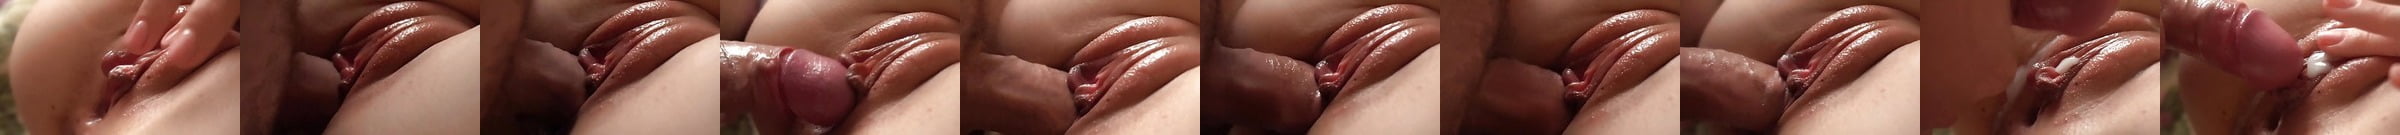 Close Up Pussy Xnxx Free Pussy Hd Porn Video 55 Xhamster